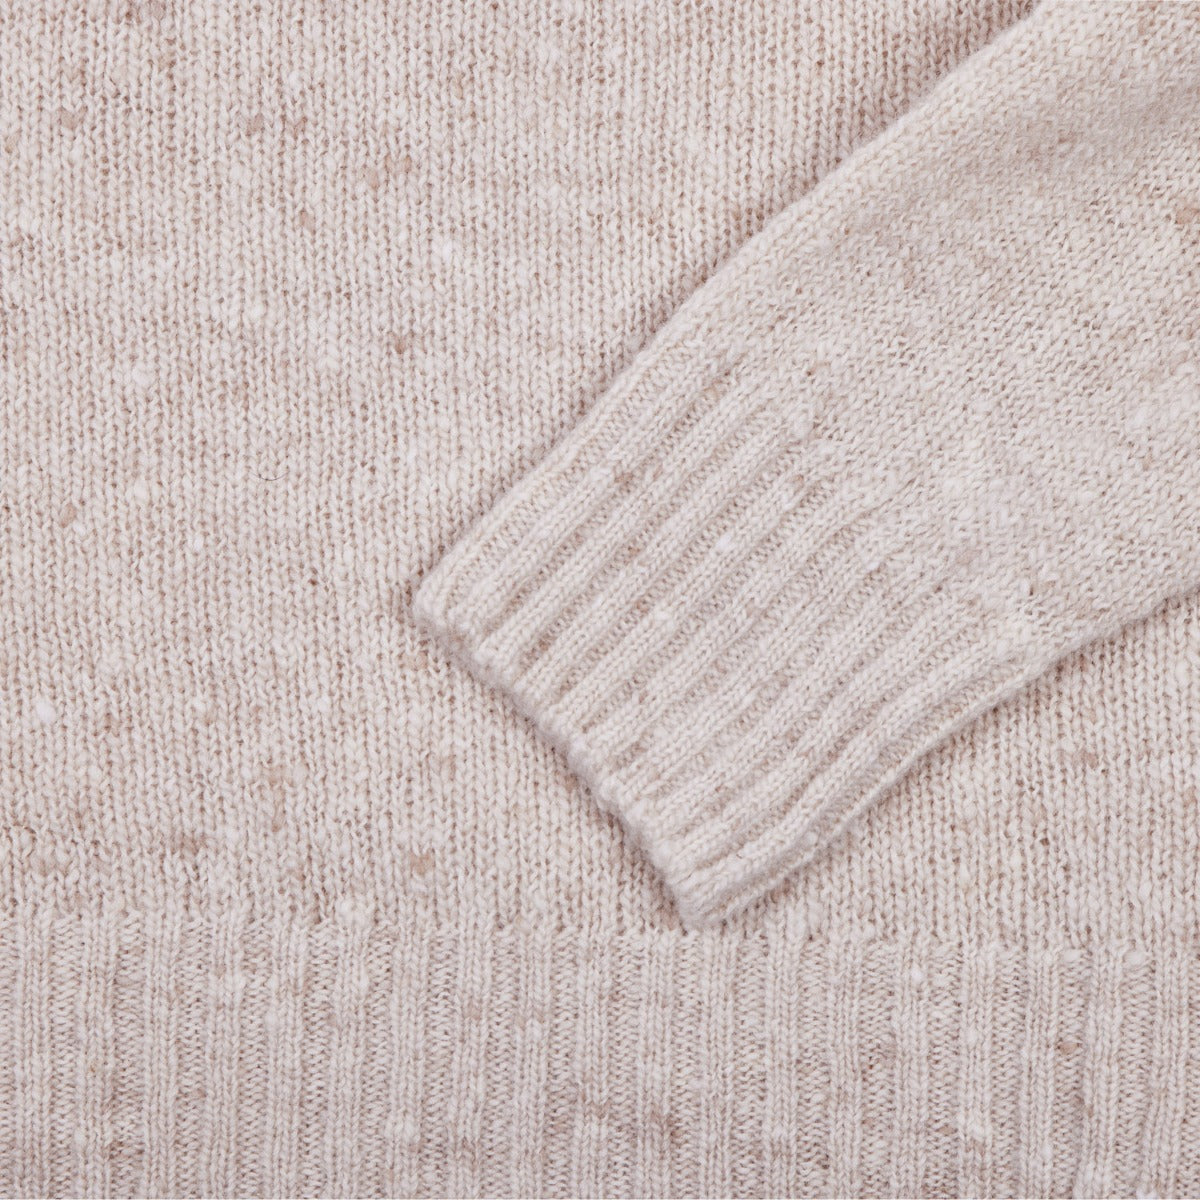 A close up image of a Sovereign Grade Oatmeal Donegal Crew Neck Sweater by KirbyAllison.com.